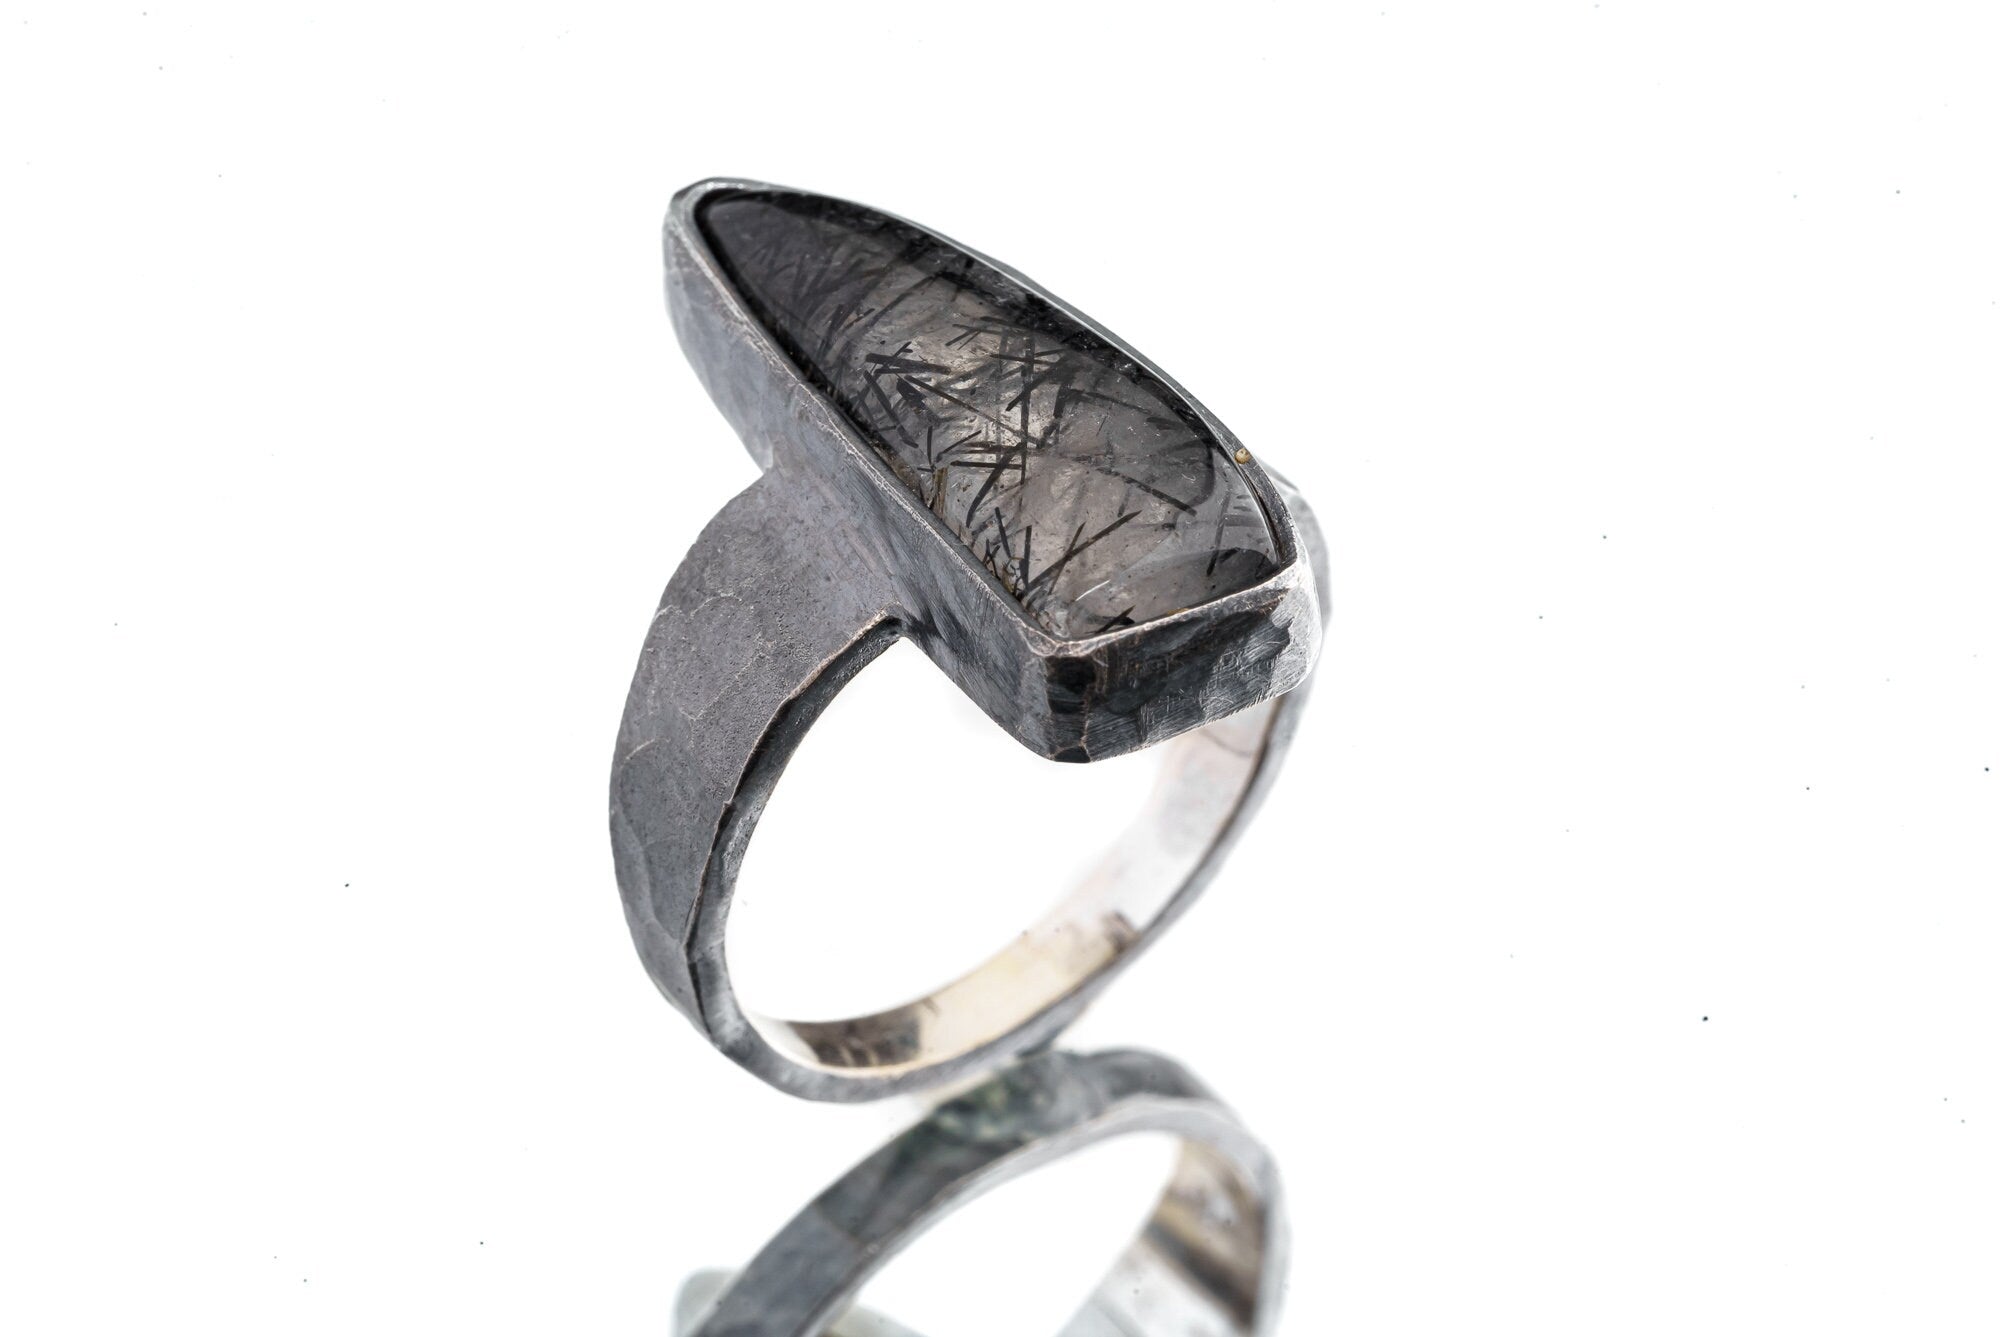 Tooth Black Rutile Quartz Cabochon - Men's / Unisex Large Crystal Ring - Size 12 US - 925 Sterling Silver - Hammer Textured & Oxidised